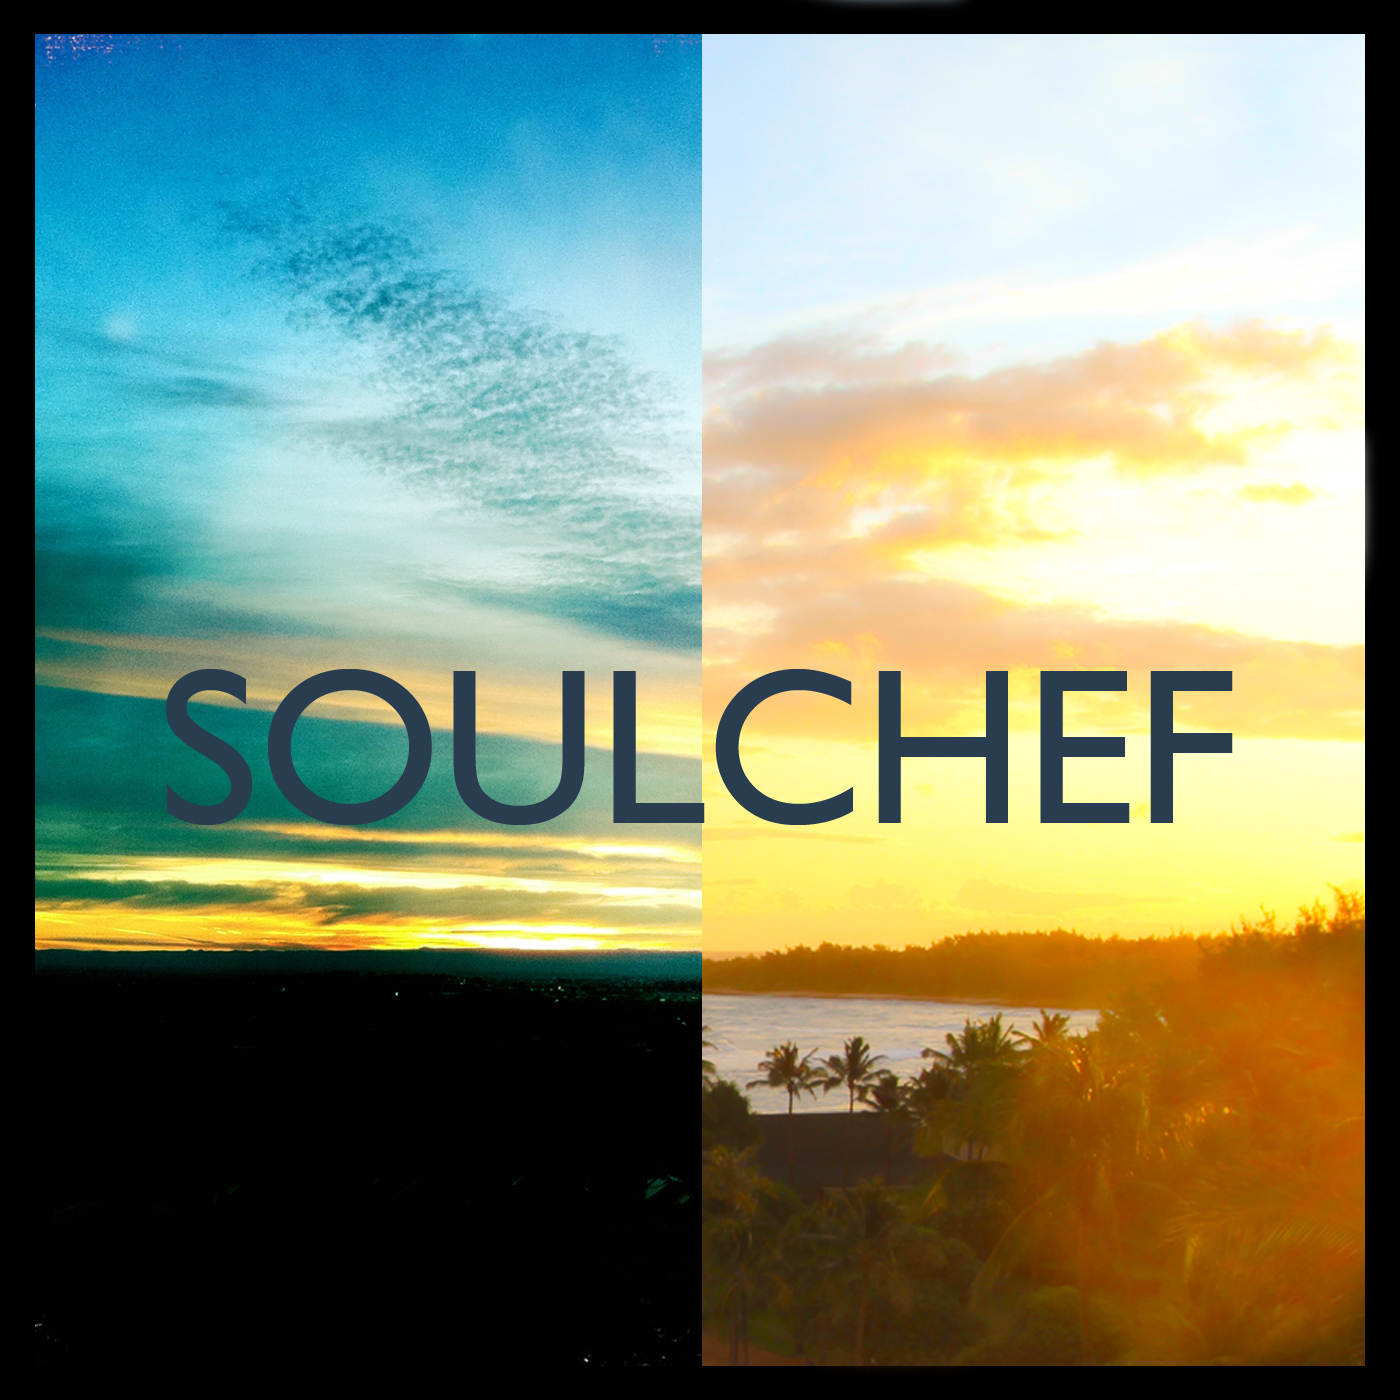 Contest: Win digital copies of SoulChef’s upcoming album ‘Here & Now’